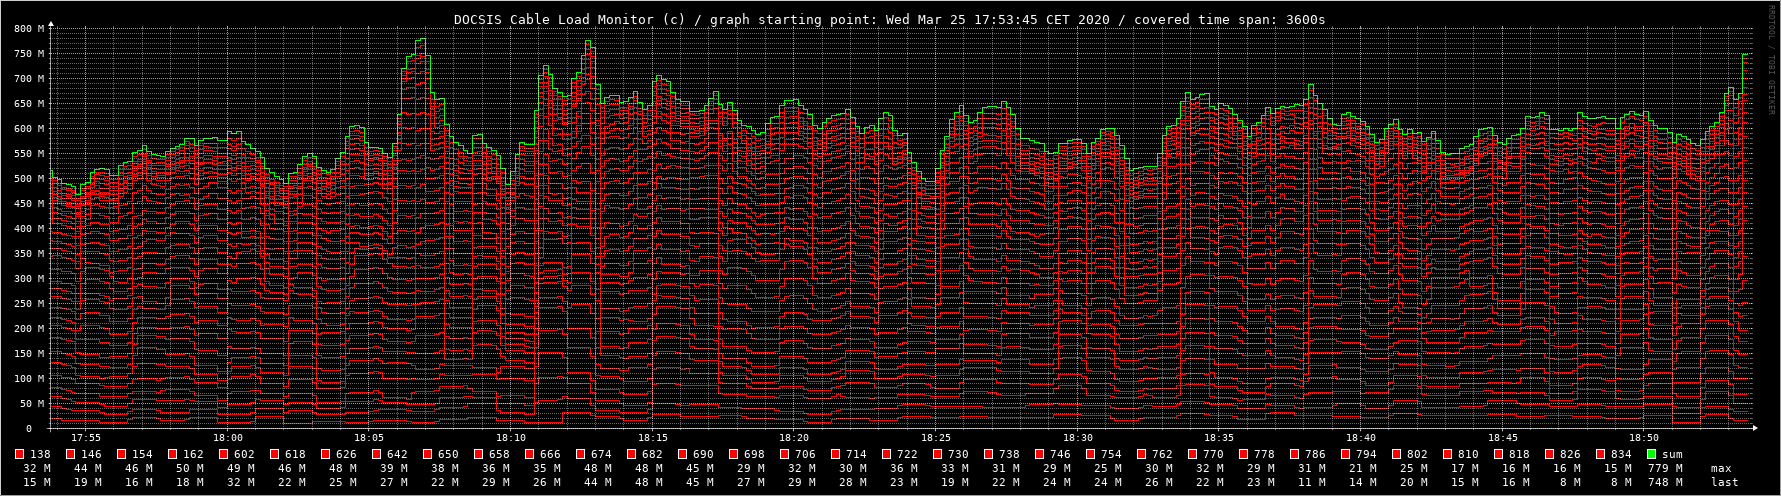 CableLoadMonitor_1h.png